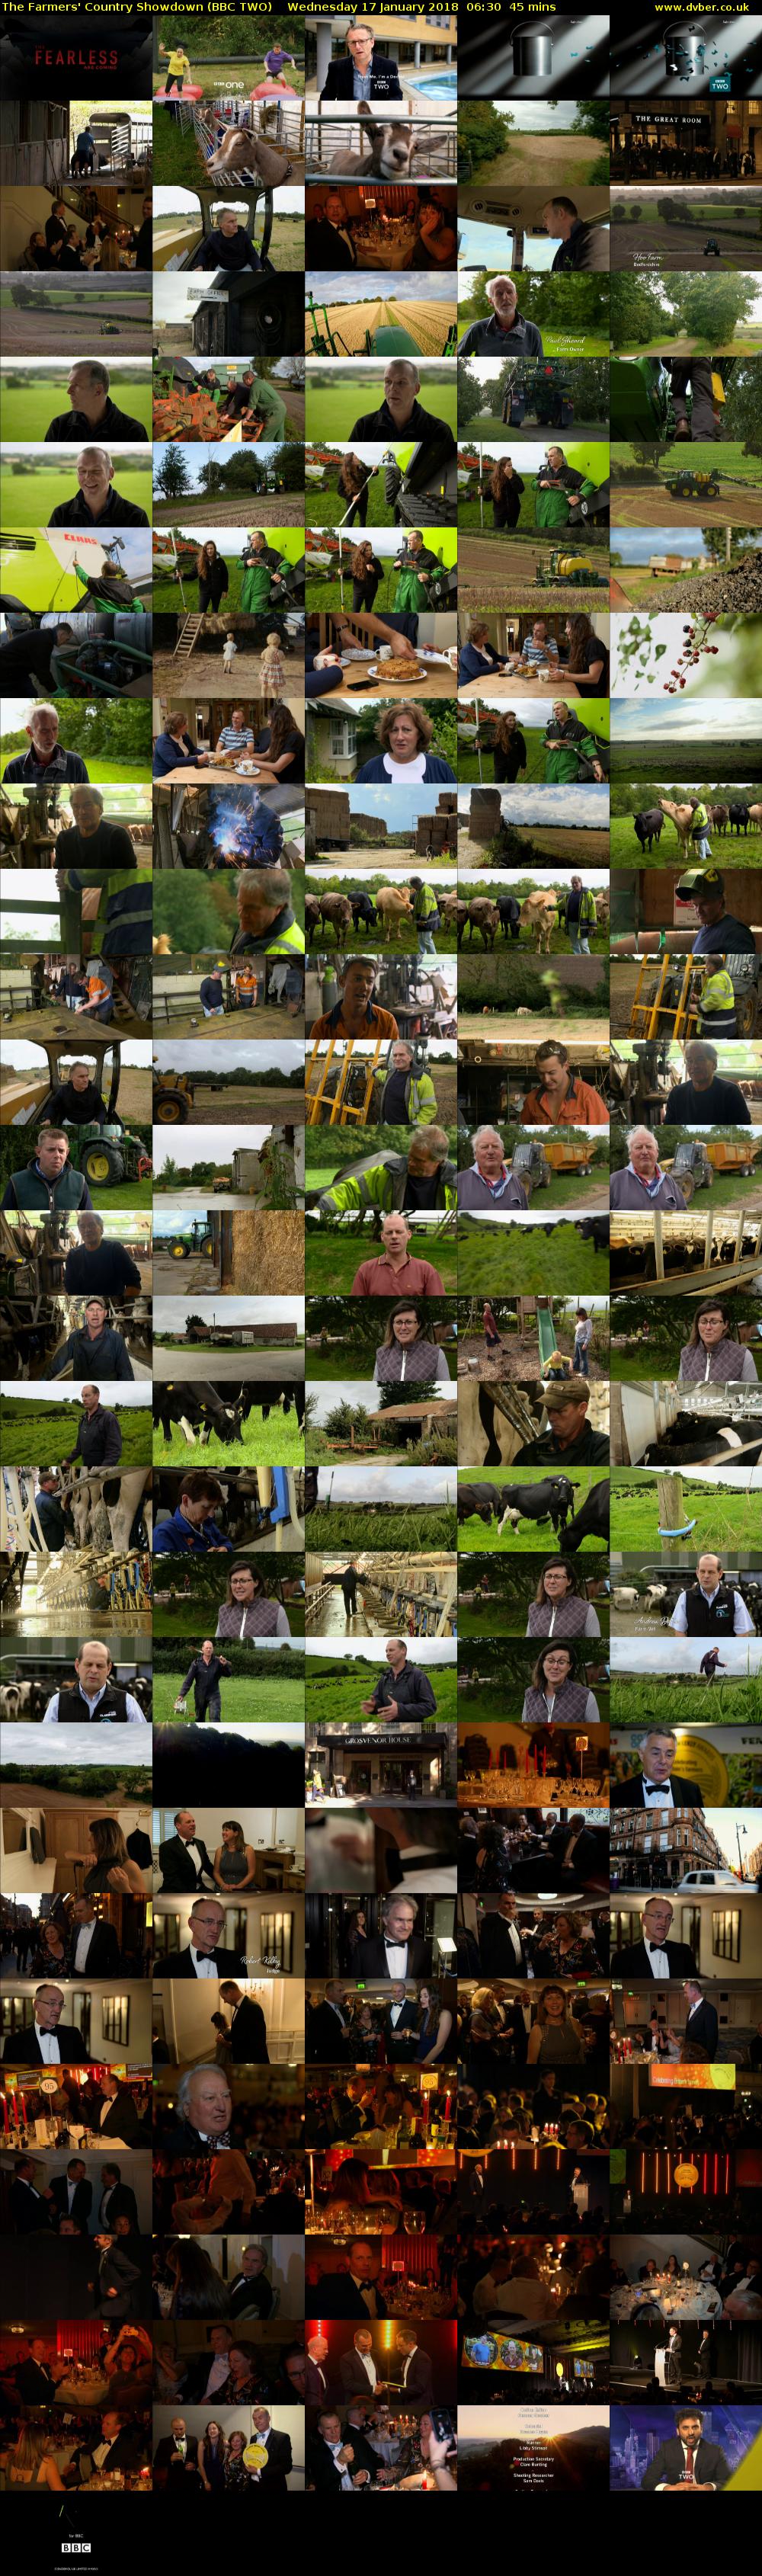 The Farmers' Country Showdown (BBC TWO) Wednesday 17 January 2018 06:30 - 07:15